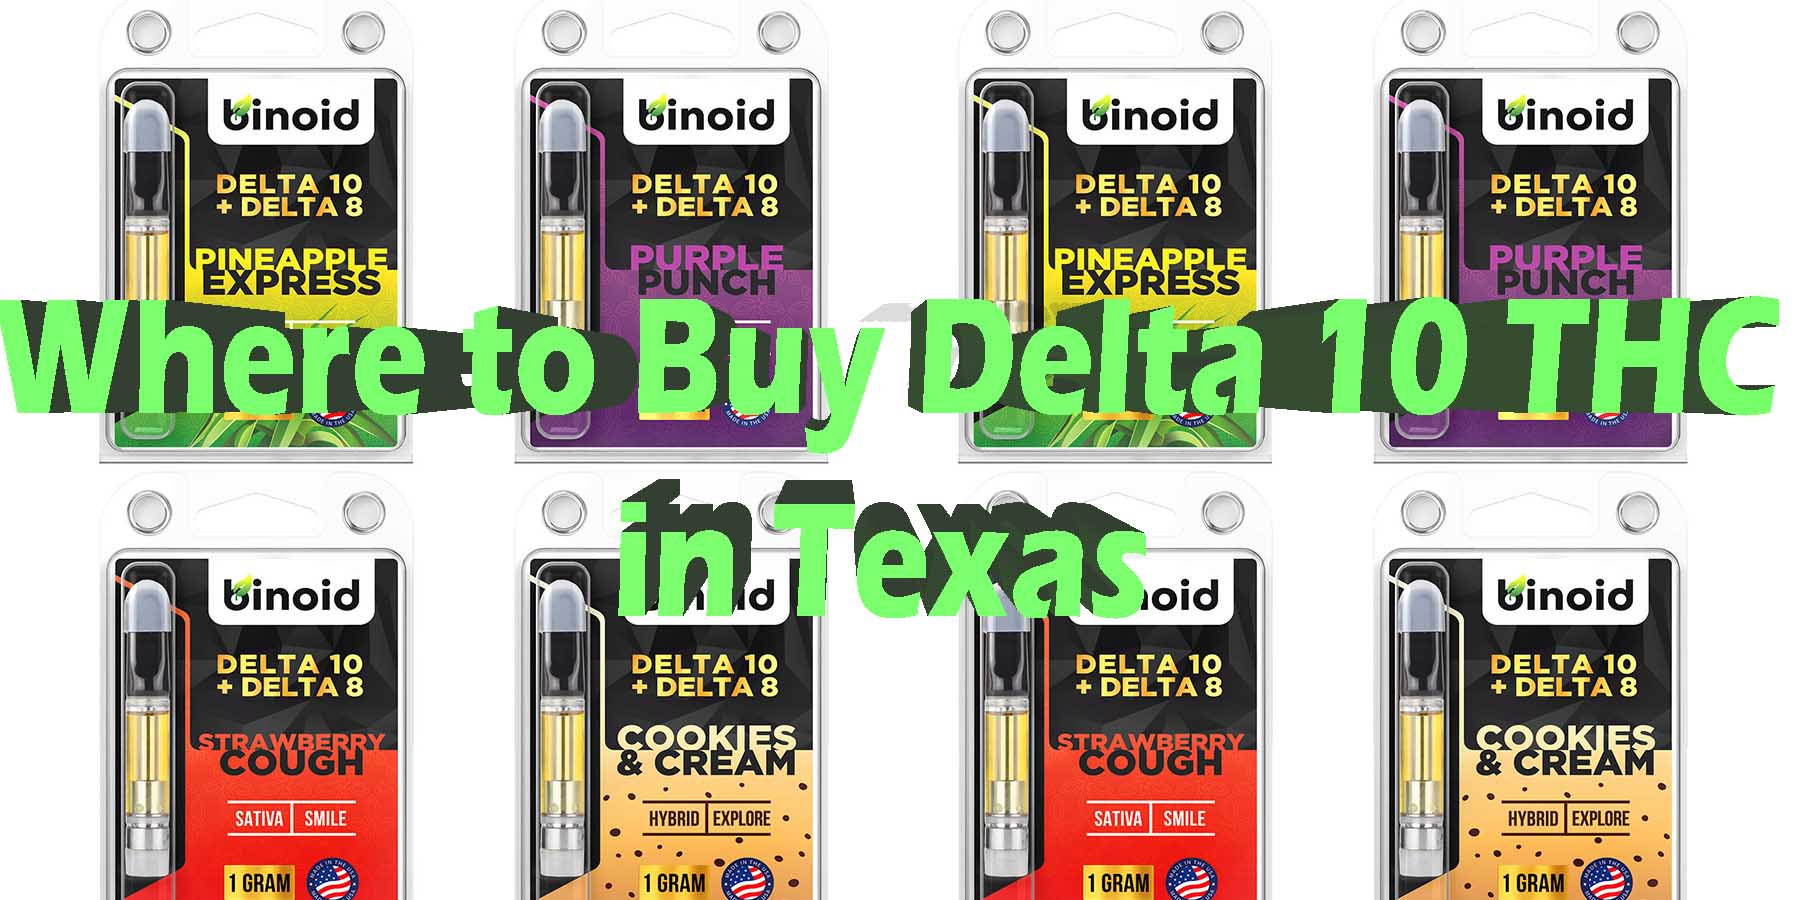 Where to Buy Delta 10 THC in Texas Discount For Smoking High Smoke Shop Online Near Me Strongest Binoid-Buy-Online-BestPlace-LowestP.j